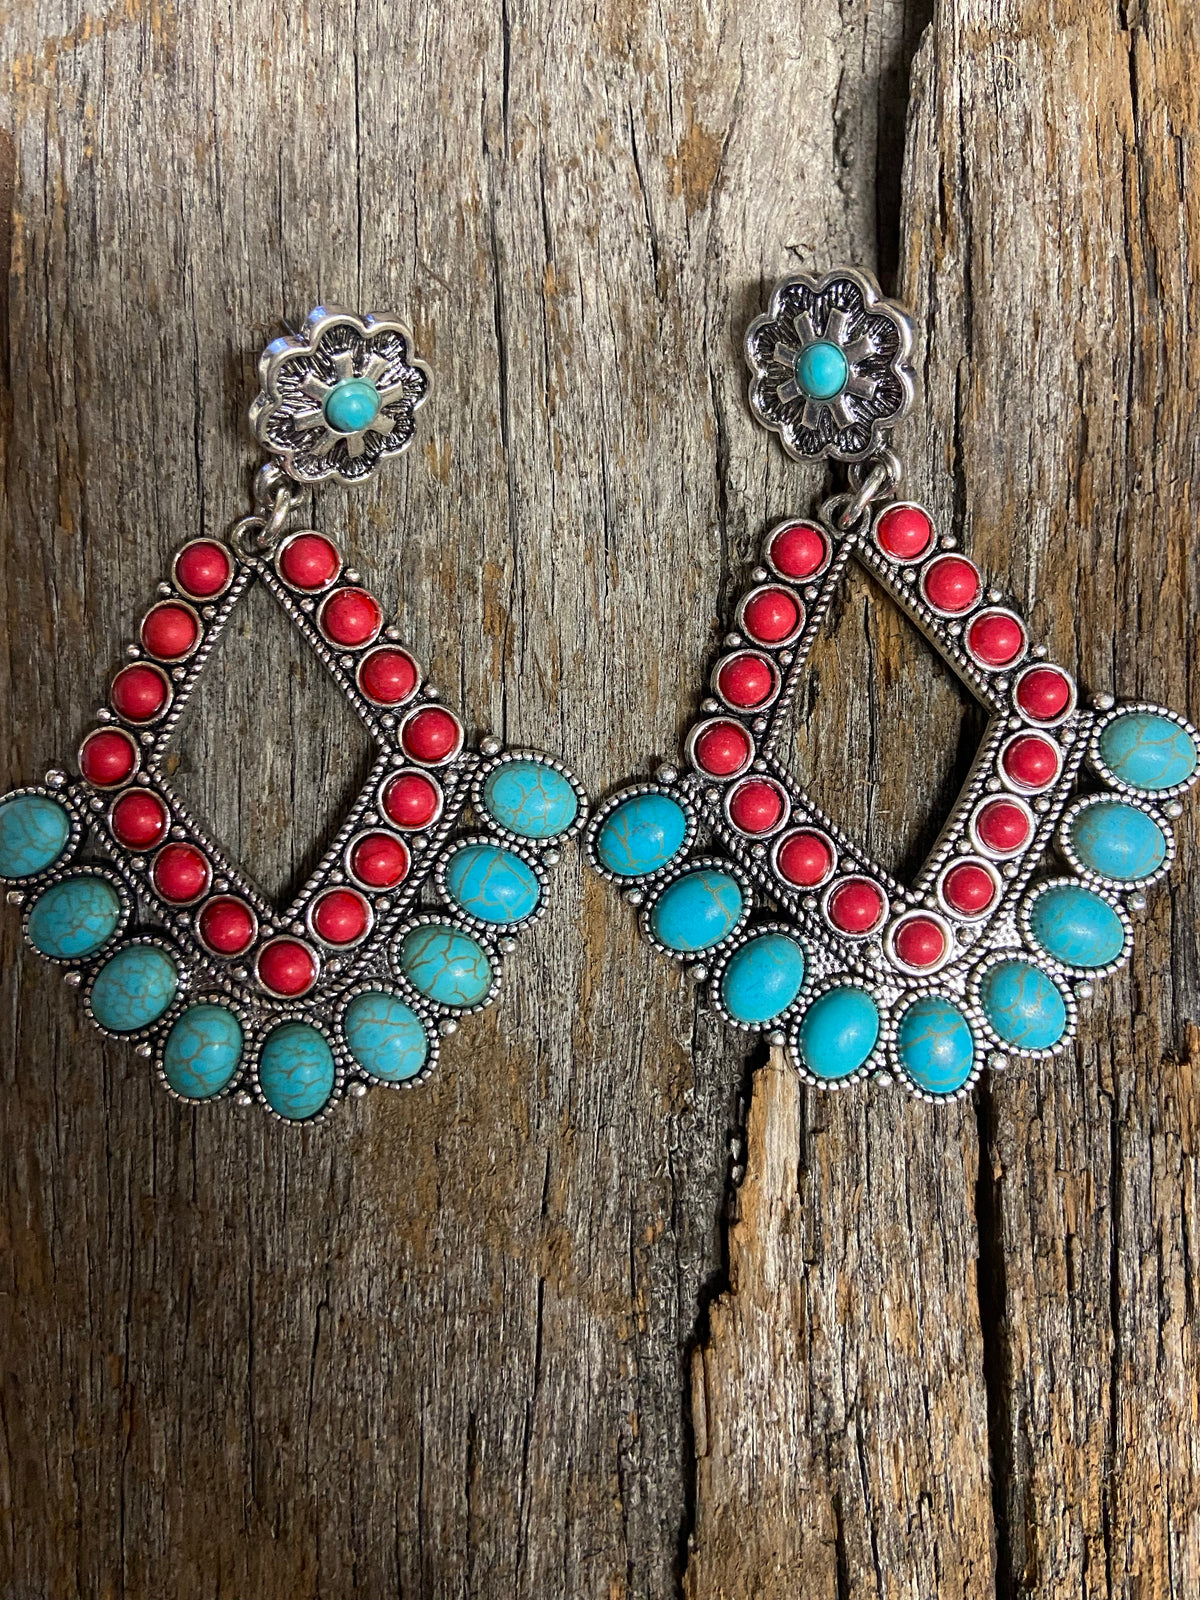 Western Earrings - Red and Turquoise Diamond Drop